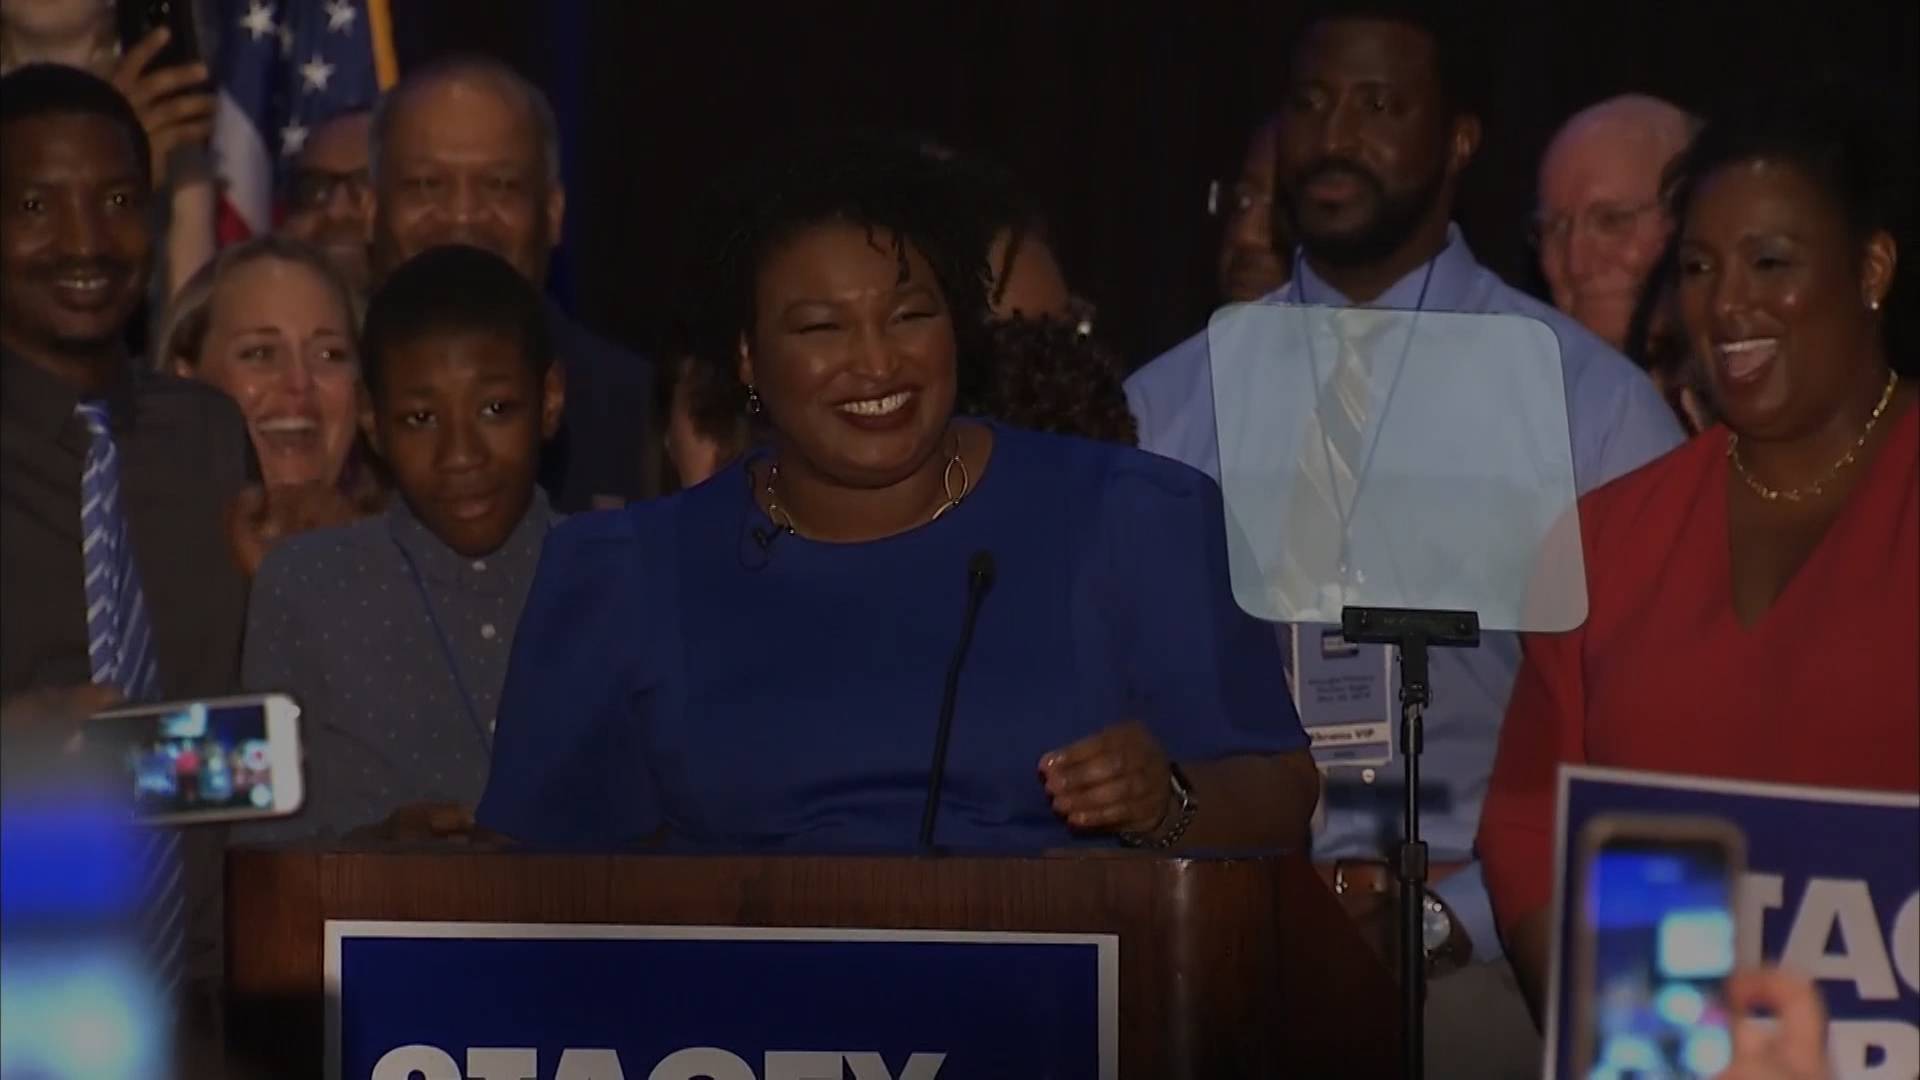 Georgia Democrats made history when they chose the first Black woman in the primary for governor.